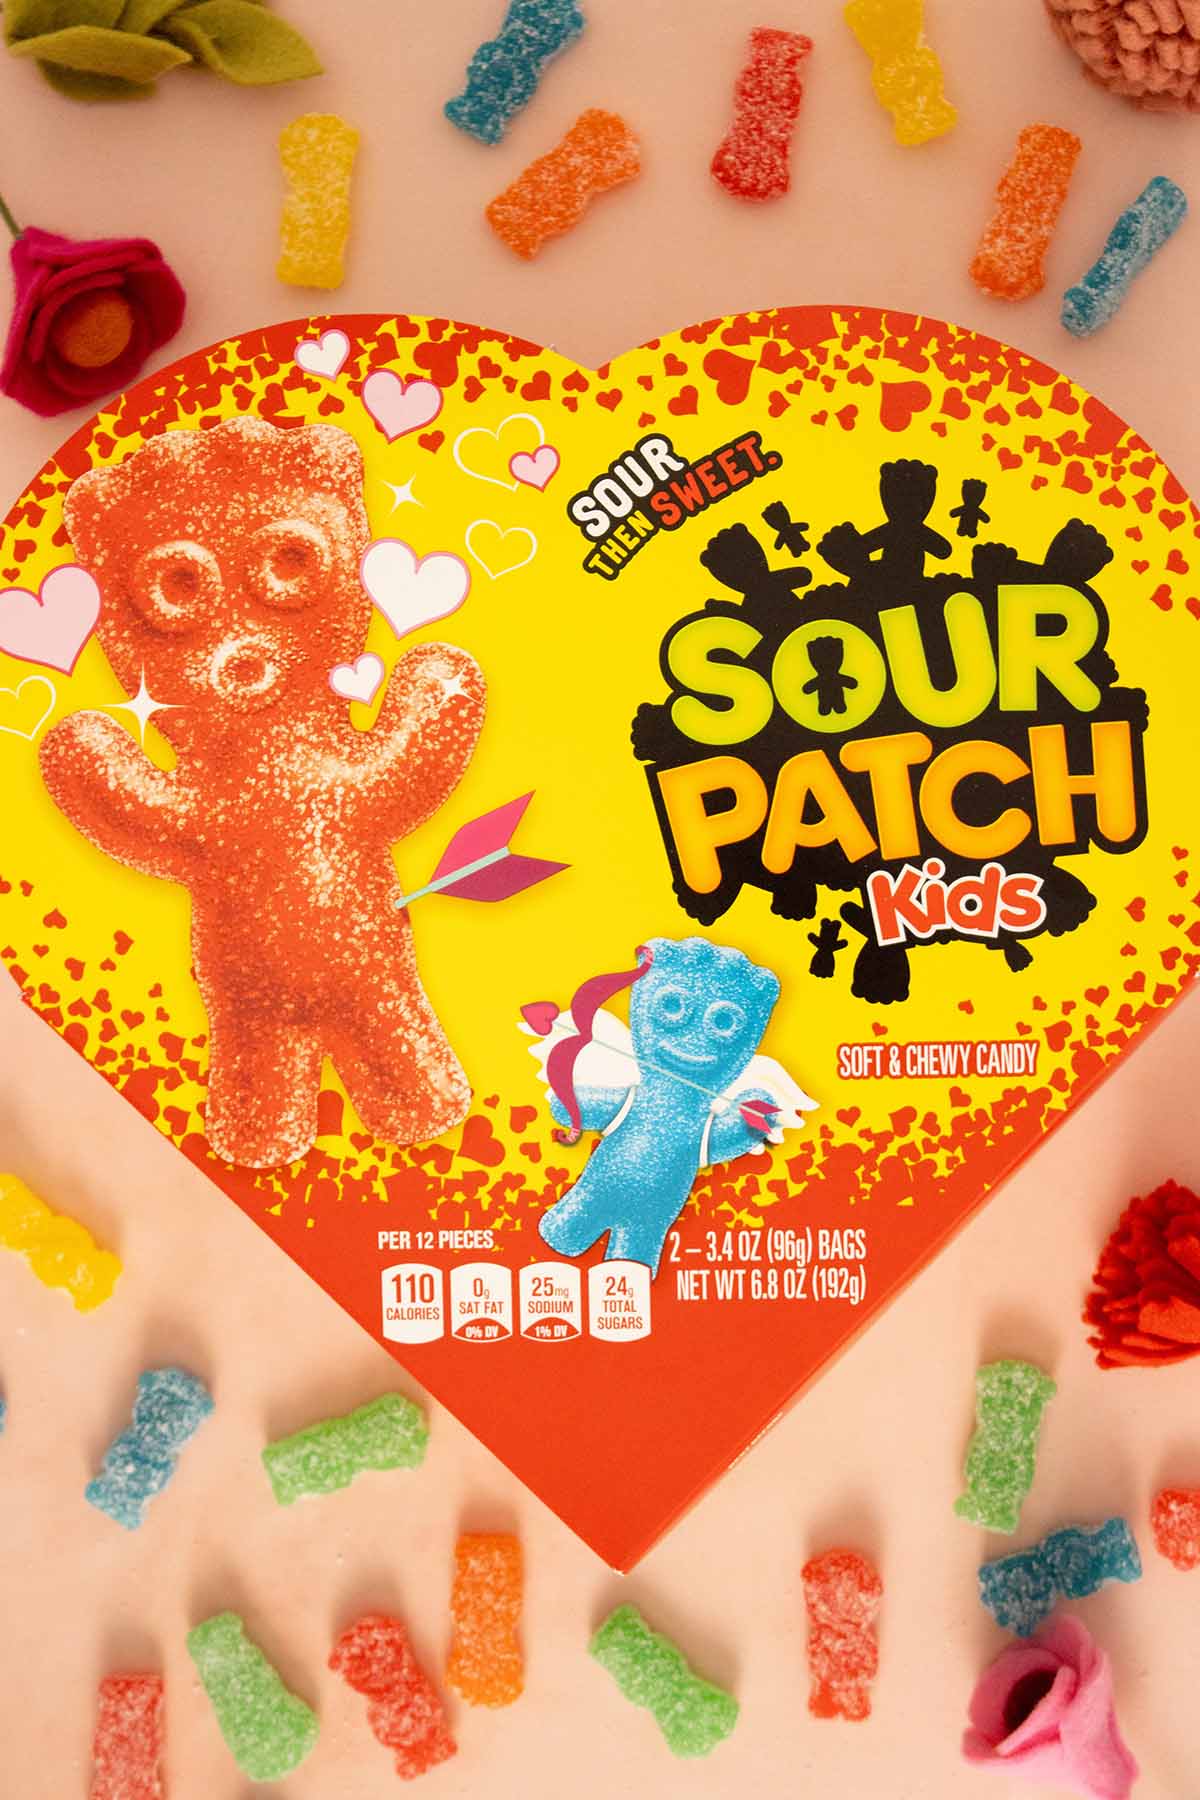 heart-shaped box of Sour Patch Kids surrounded by candy